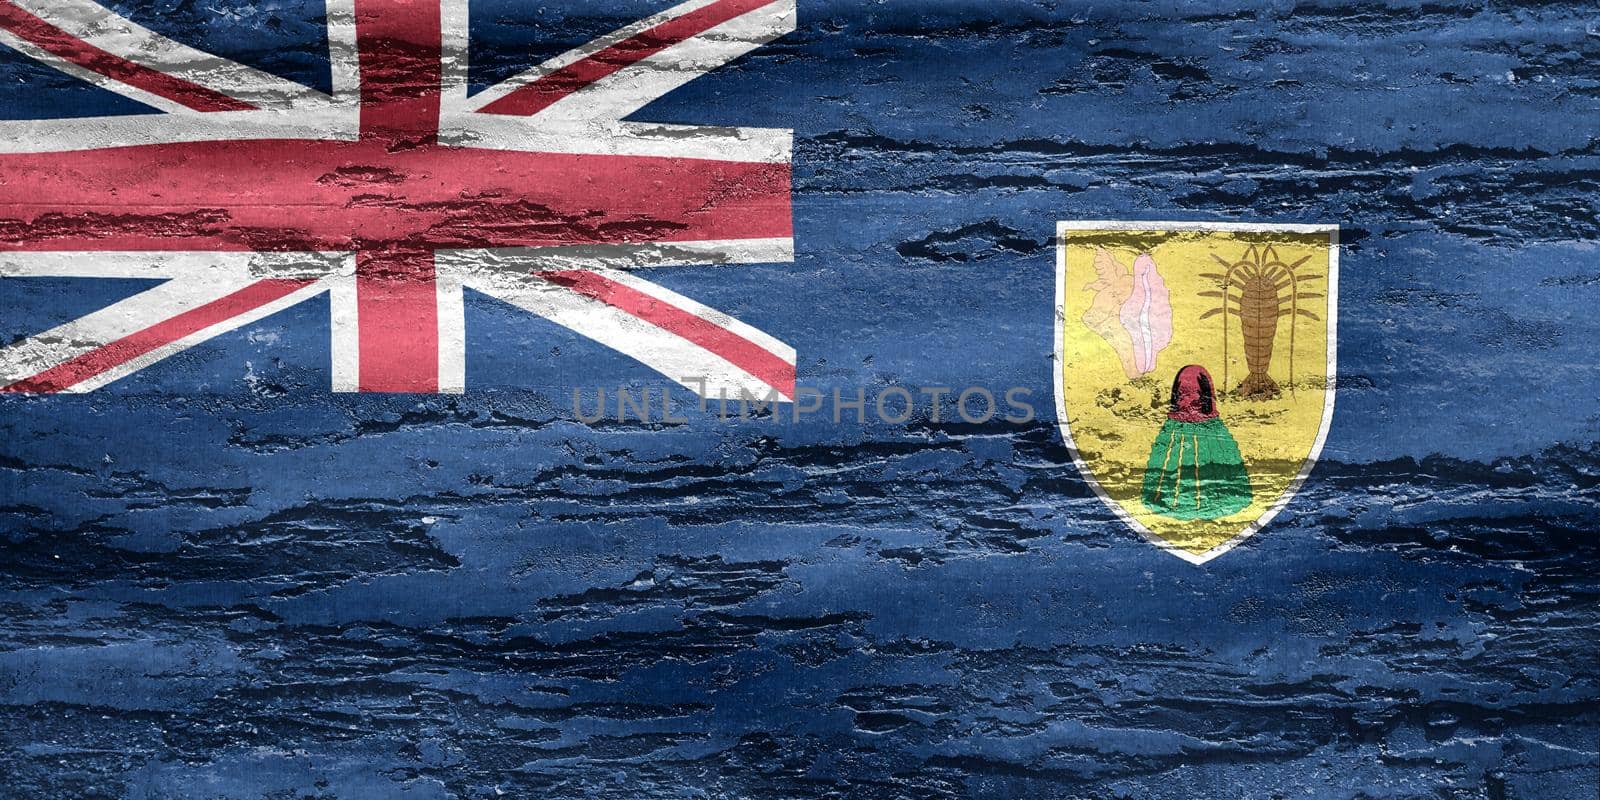 3D-Illustration of a Caicos Islands flag - realistic waving fabric flag by MP_foto71